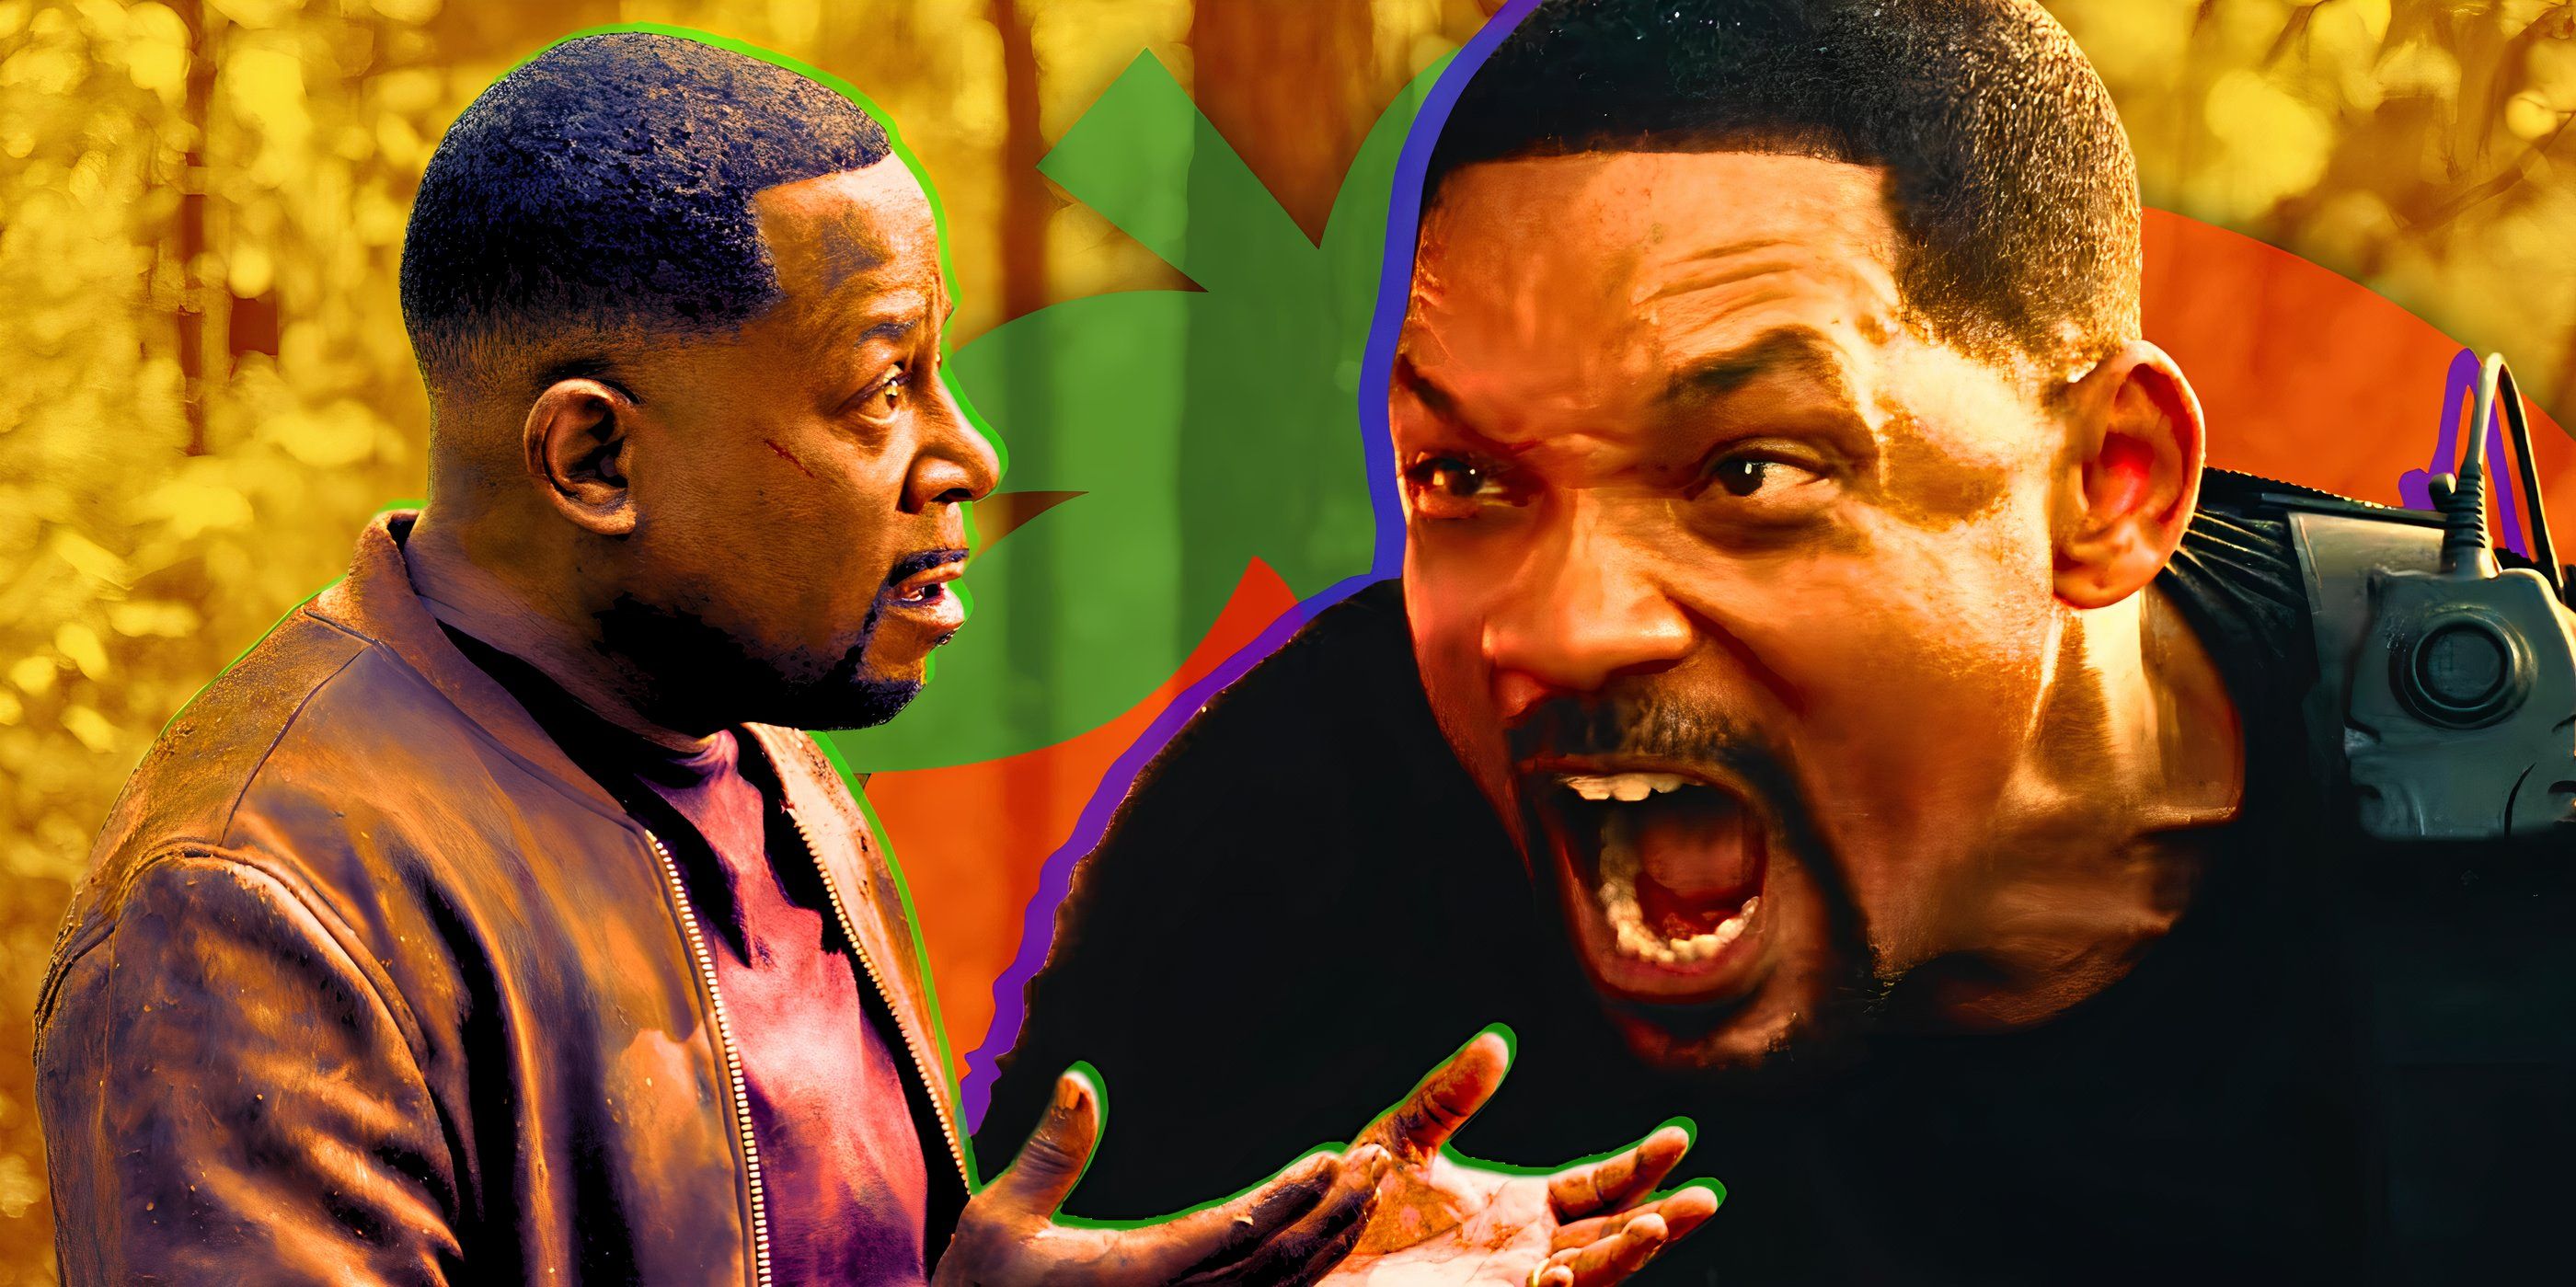 Weekend Box Office Bad Boys 4 Revives Summer With Franchise's 2ndBest